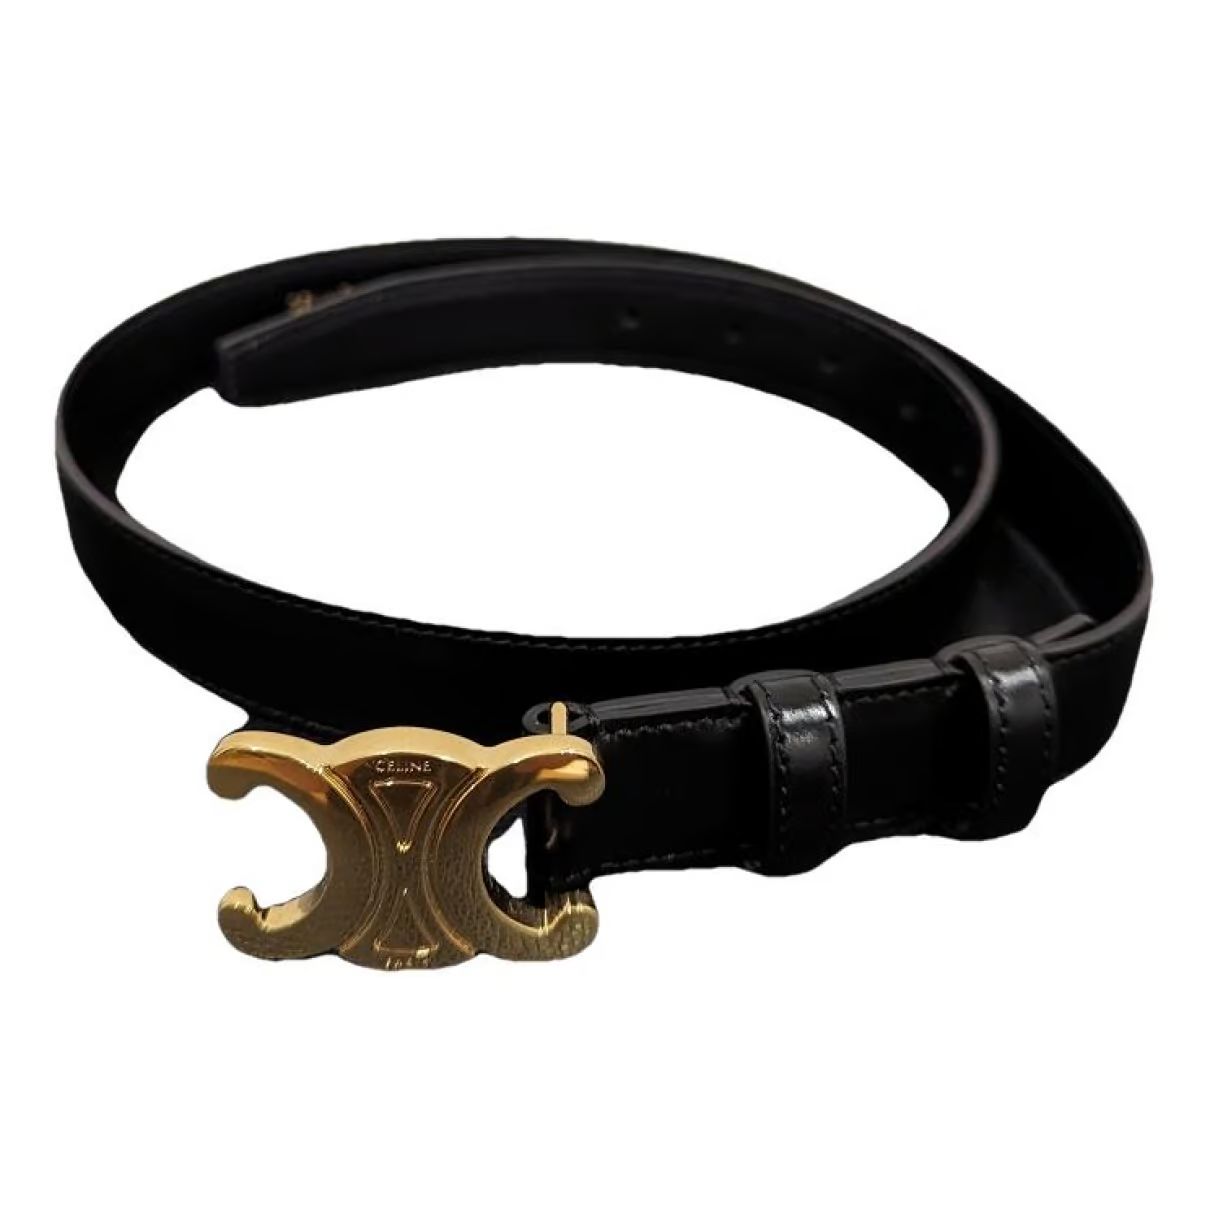 Triomphe leather belt Celine Black size 75 cm in Leather - 38175996 | Vestiaire Collective (Global)